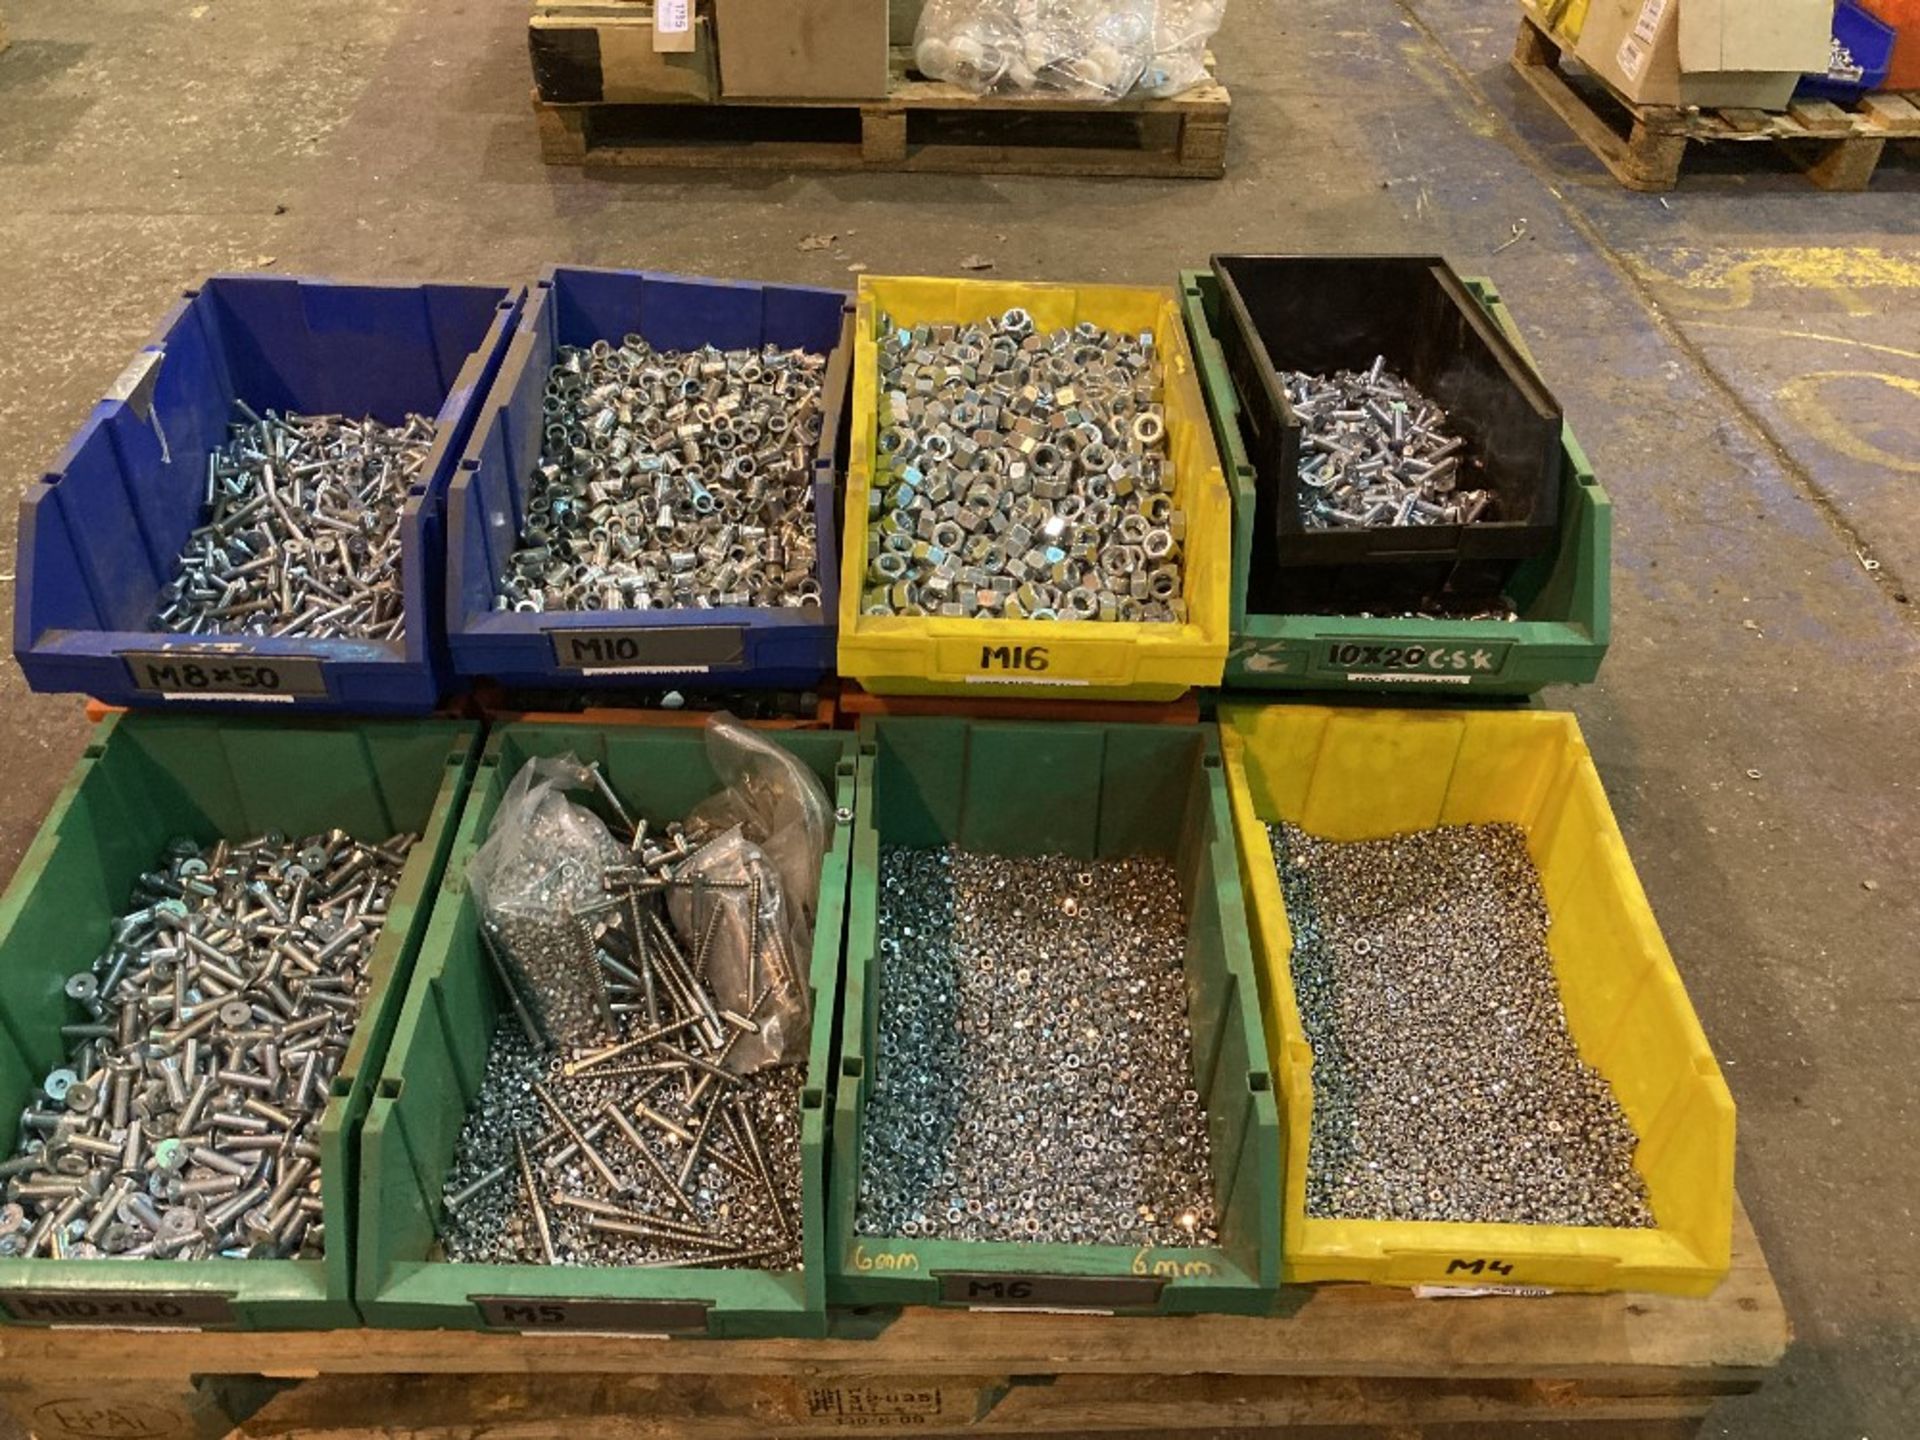 Quantity of Various Sized Nuts, Bolts, Collars Etc